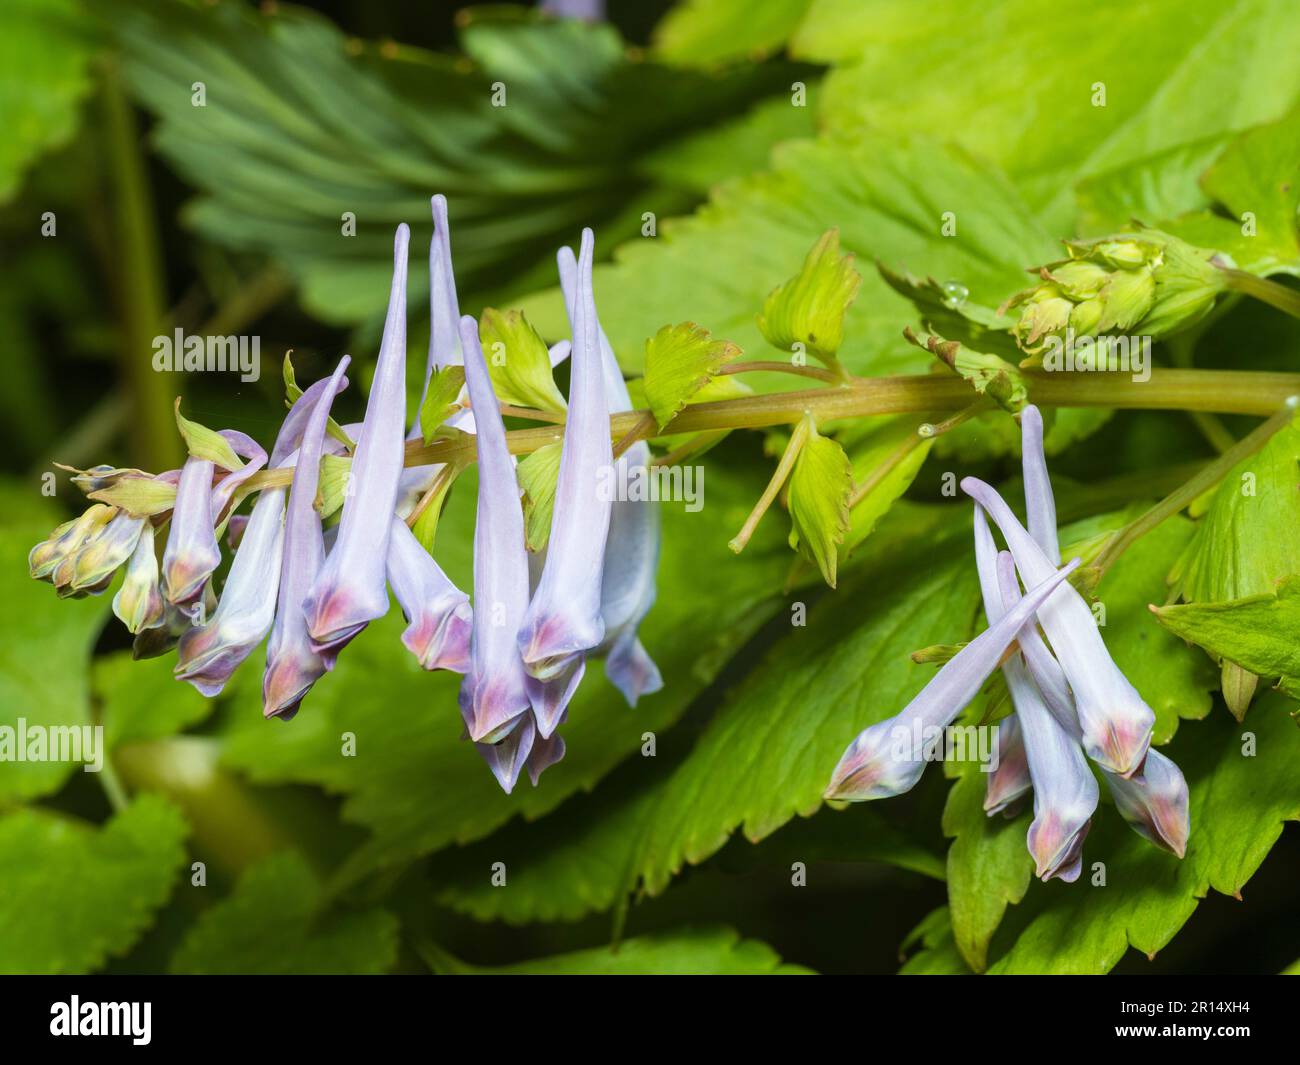 Spring flowers in the spike of the hardy evergreen perennial, Corydalis temulifolia 'Chocolate Stars' Stock Photo